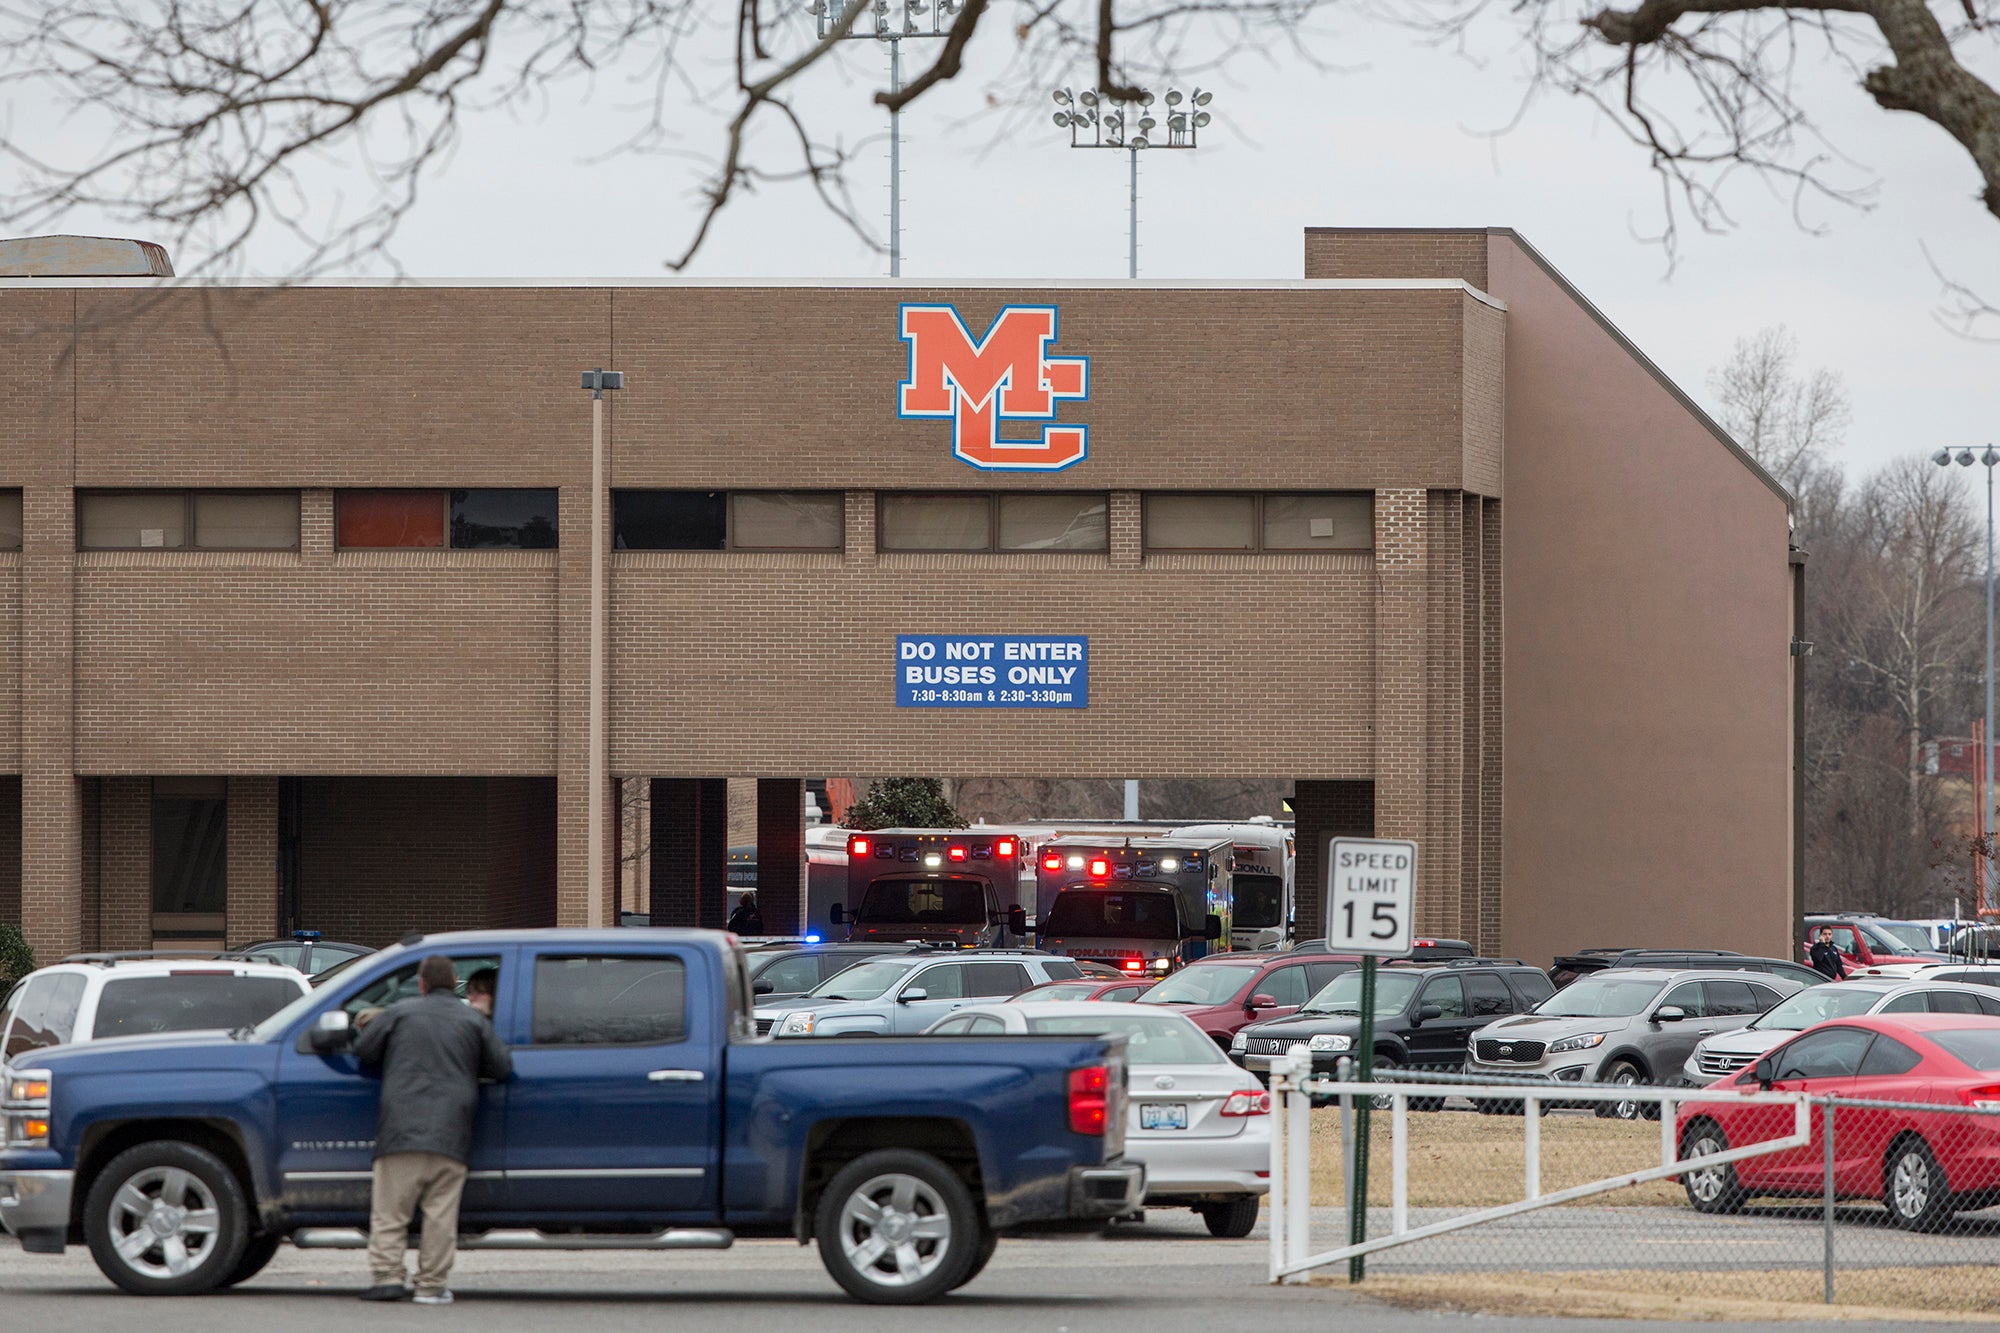 Emergency crews respond to Marshall County High School after a fatal school shooting